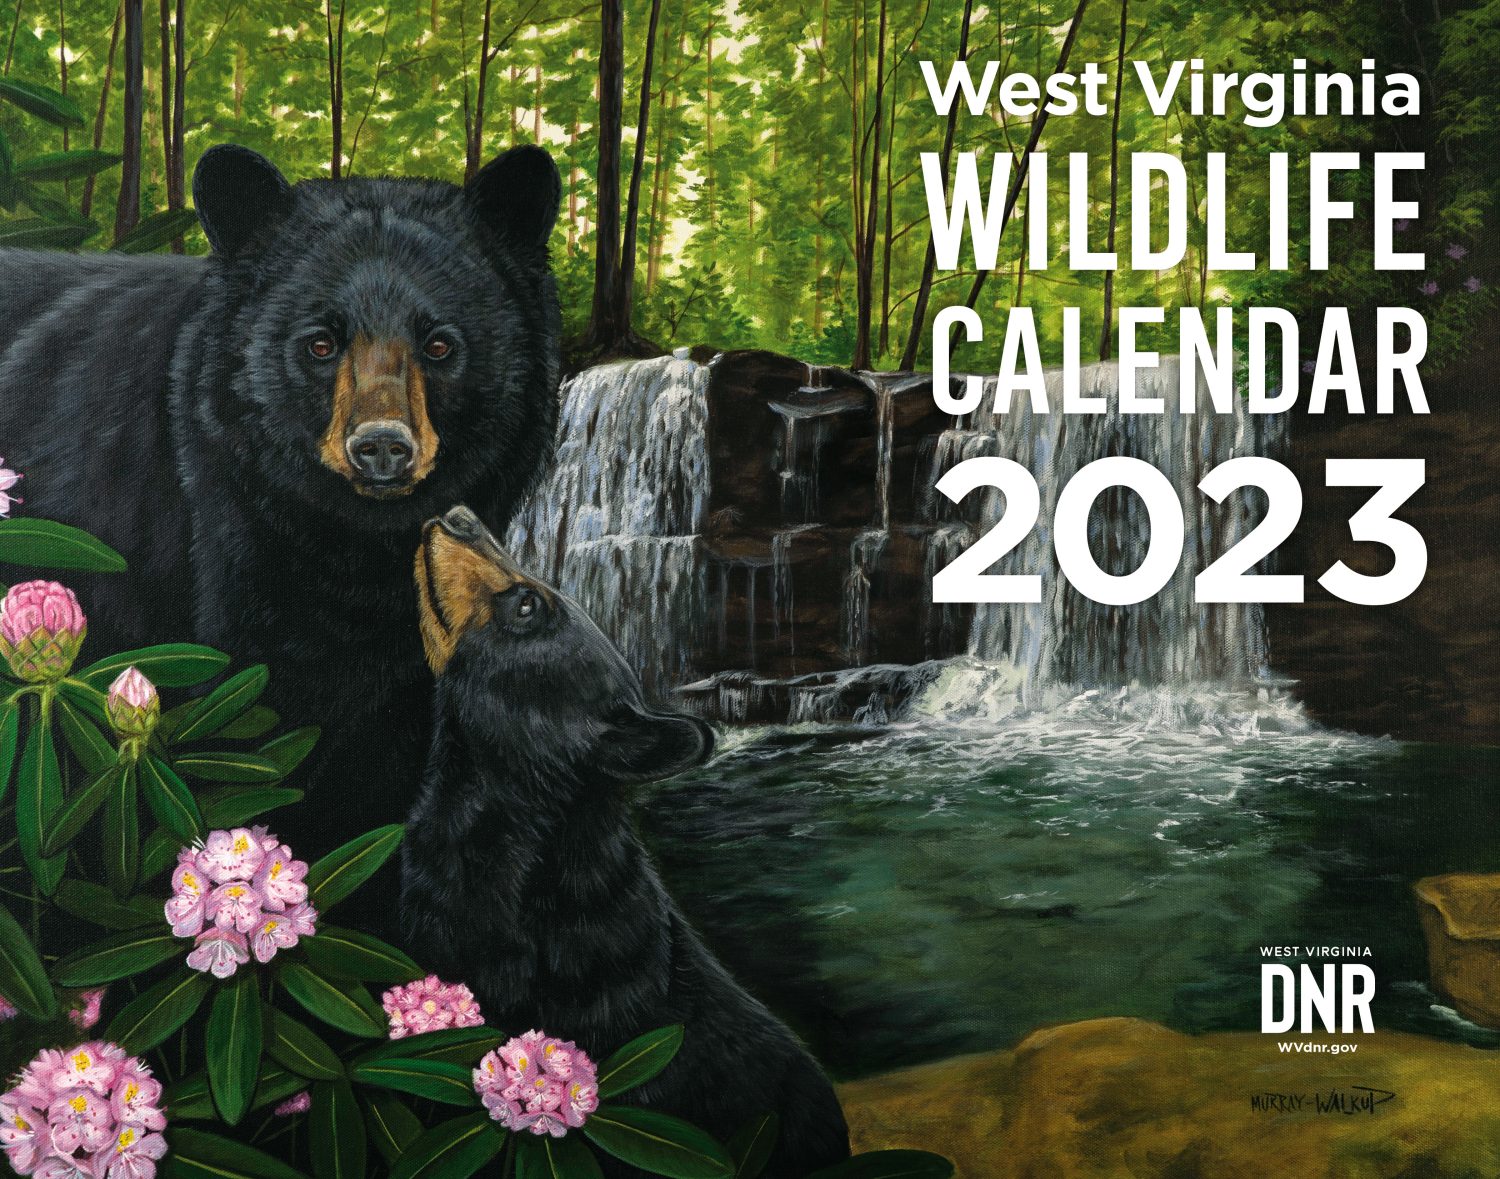 2023 West Virginia Wildlife Calendar now available to purchase WVDNR